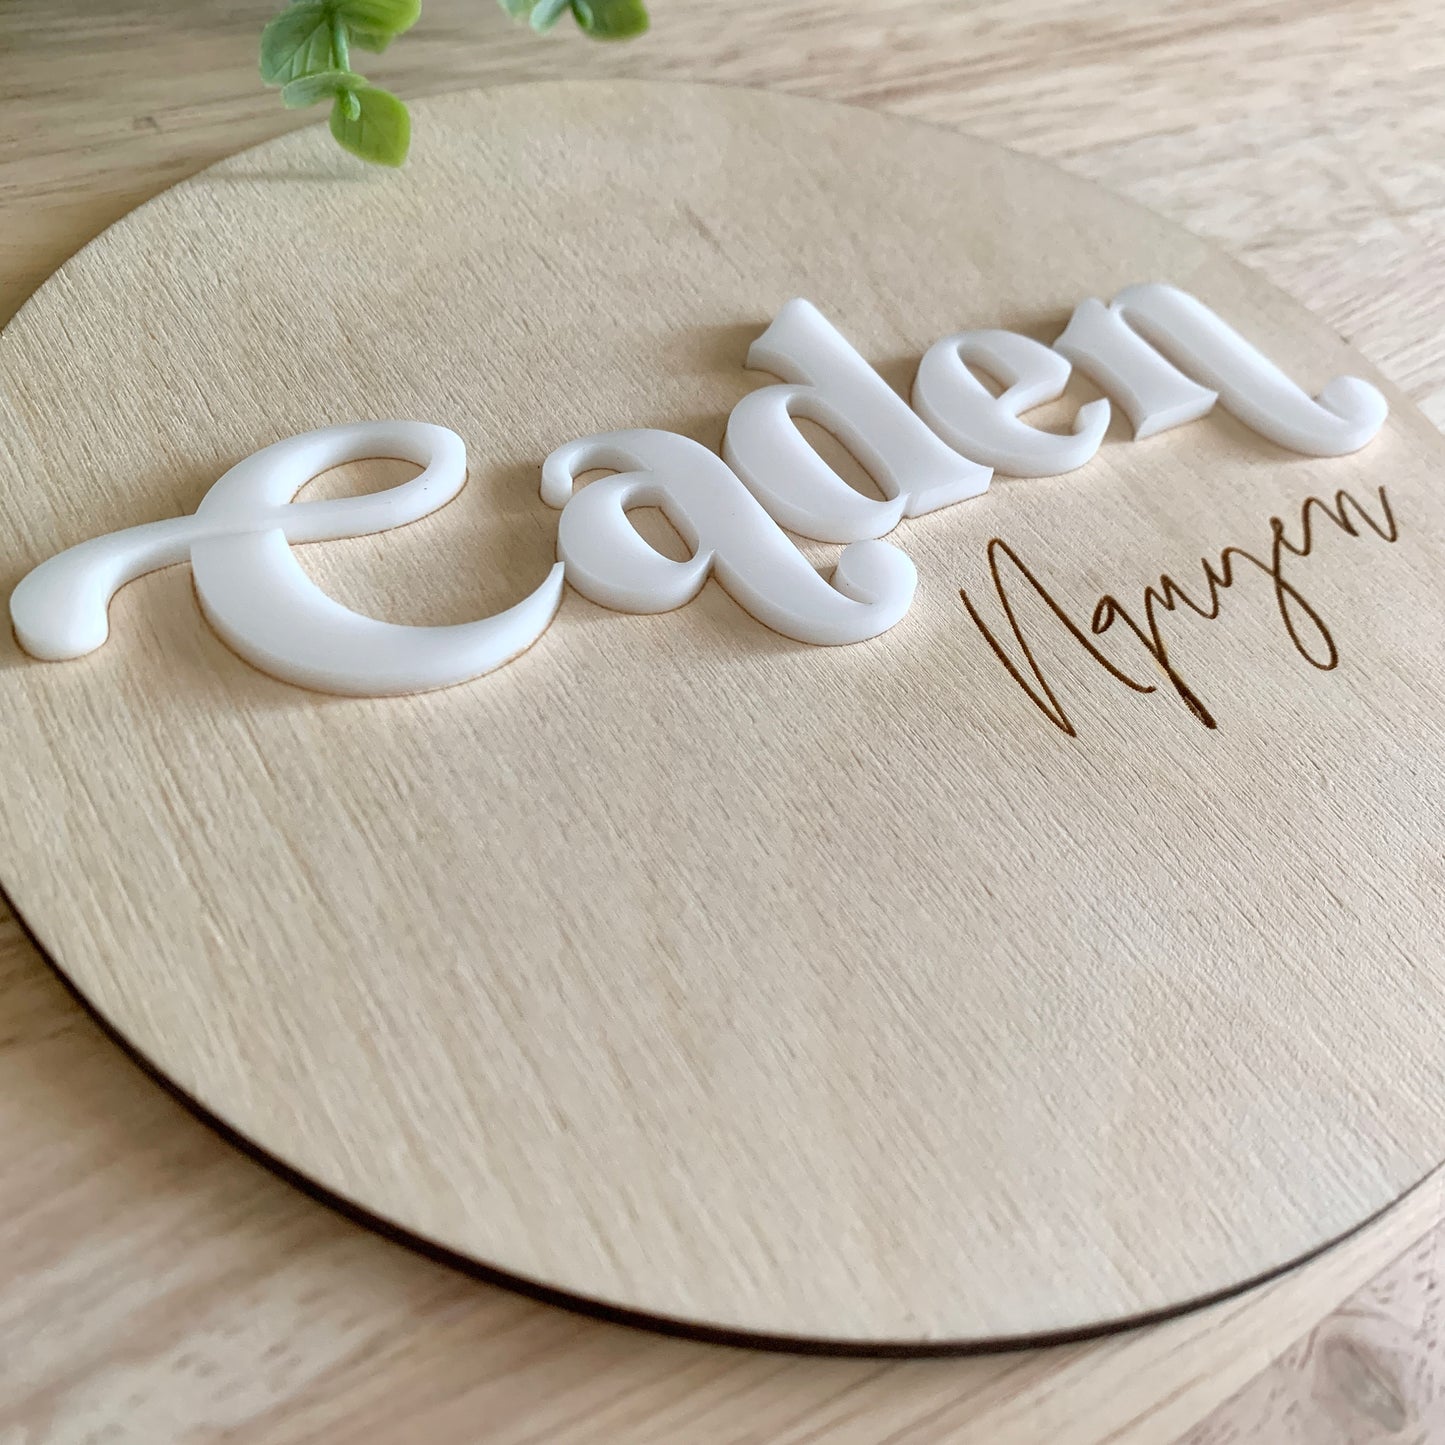 Baby Name Sign / Baby Photo Prop / Pregnancy Announcement / Wooden and Acrylic Signs